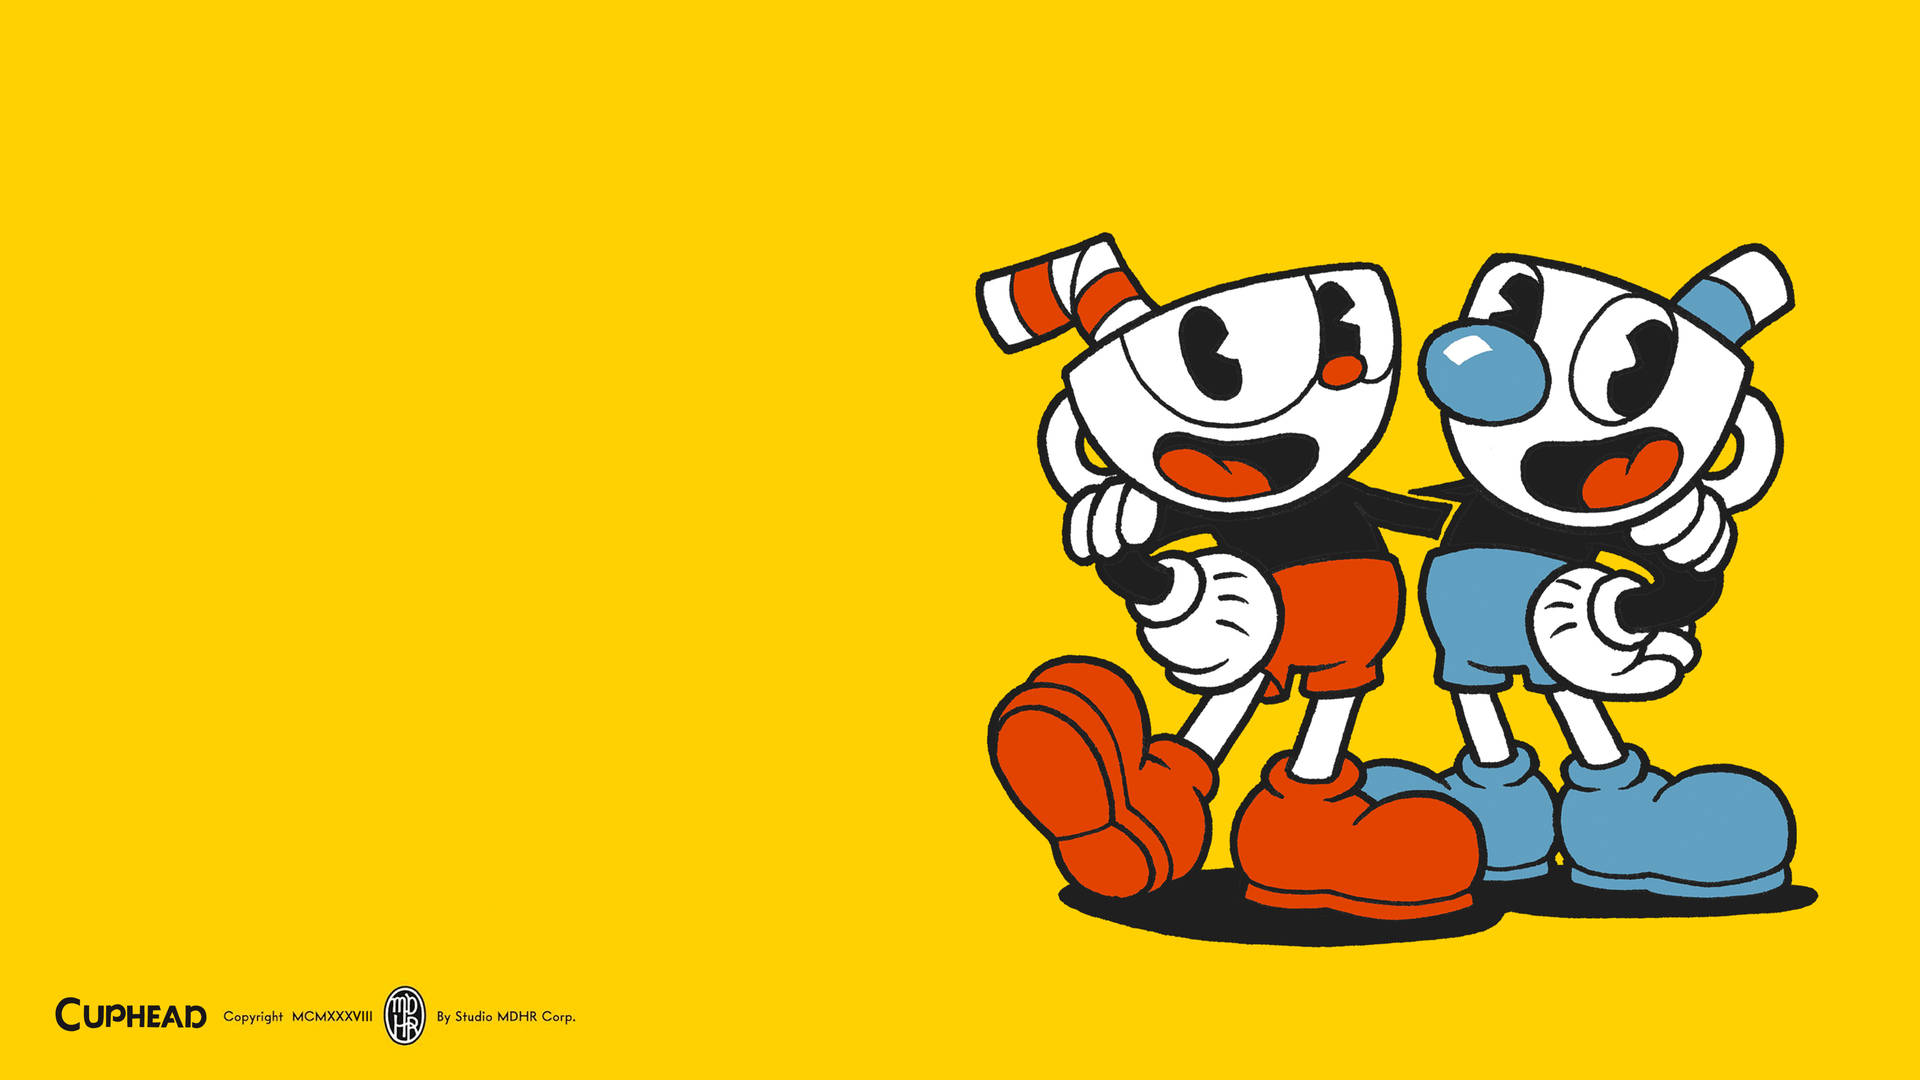 Cuphead and Mugman prepare for their next adventure. Wallpaper